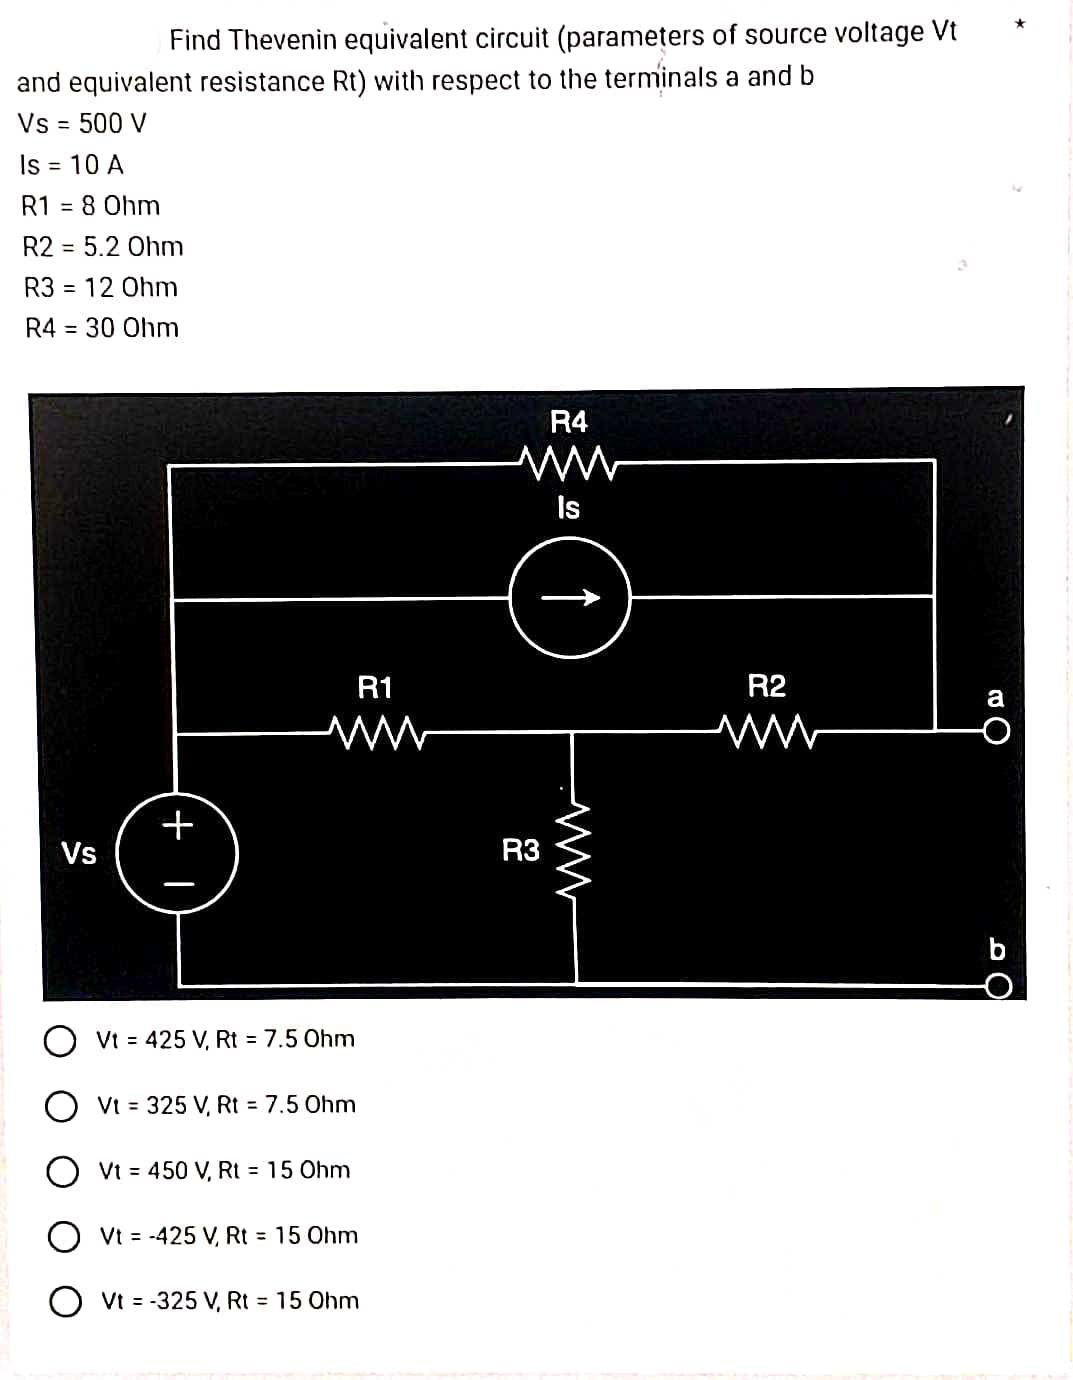 Find Thevenin equivalent circuit (parameters of source voltage Vt
and equivalent resistance Rt) with respect to the terminals a and b
Vs = 500 V
Is = 10 A
R1 = 8 0hm
R2 = 5.2 Ohm
R3
R4 = 30 Ohm
= 12 Ohm
Vs
+1
R1
ww
O Vt = 425 V, Rt = 7.5 Ohm
OVt = 325 V, Rt = 7.5 Ohm
OVt = 450 V, Rt = 15 Ohm
OVt = -425 V, Rt = 15 Ohm
O Vt = -325 V, Rt = 15 Ohm
R4
www
Is
R3
↑
R2
a
C
*